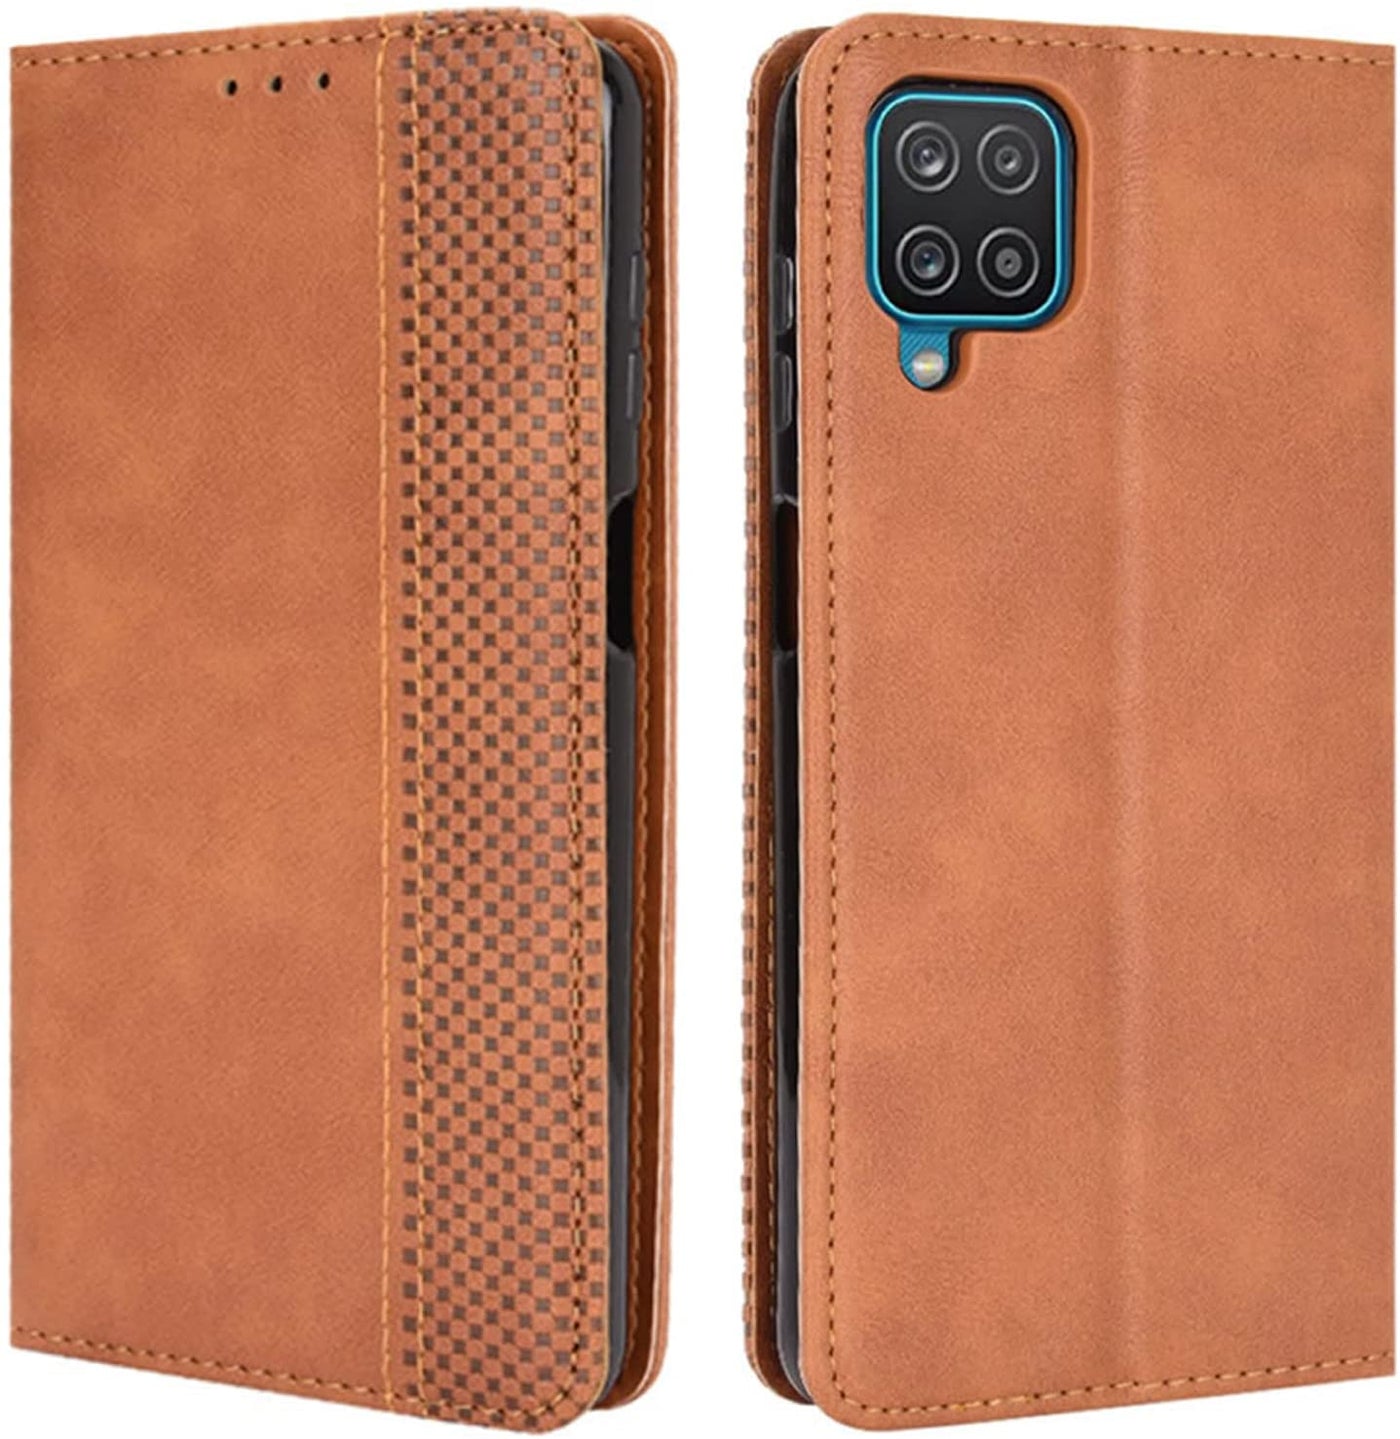 Samsung Galaxy M42 brown color leather wallet flip cover case By excelsior